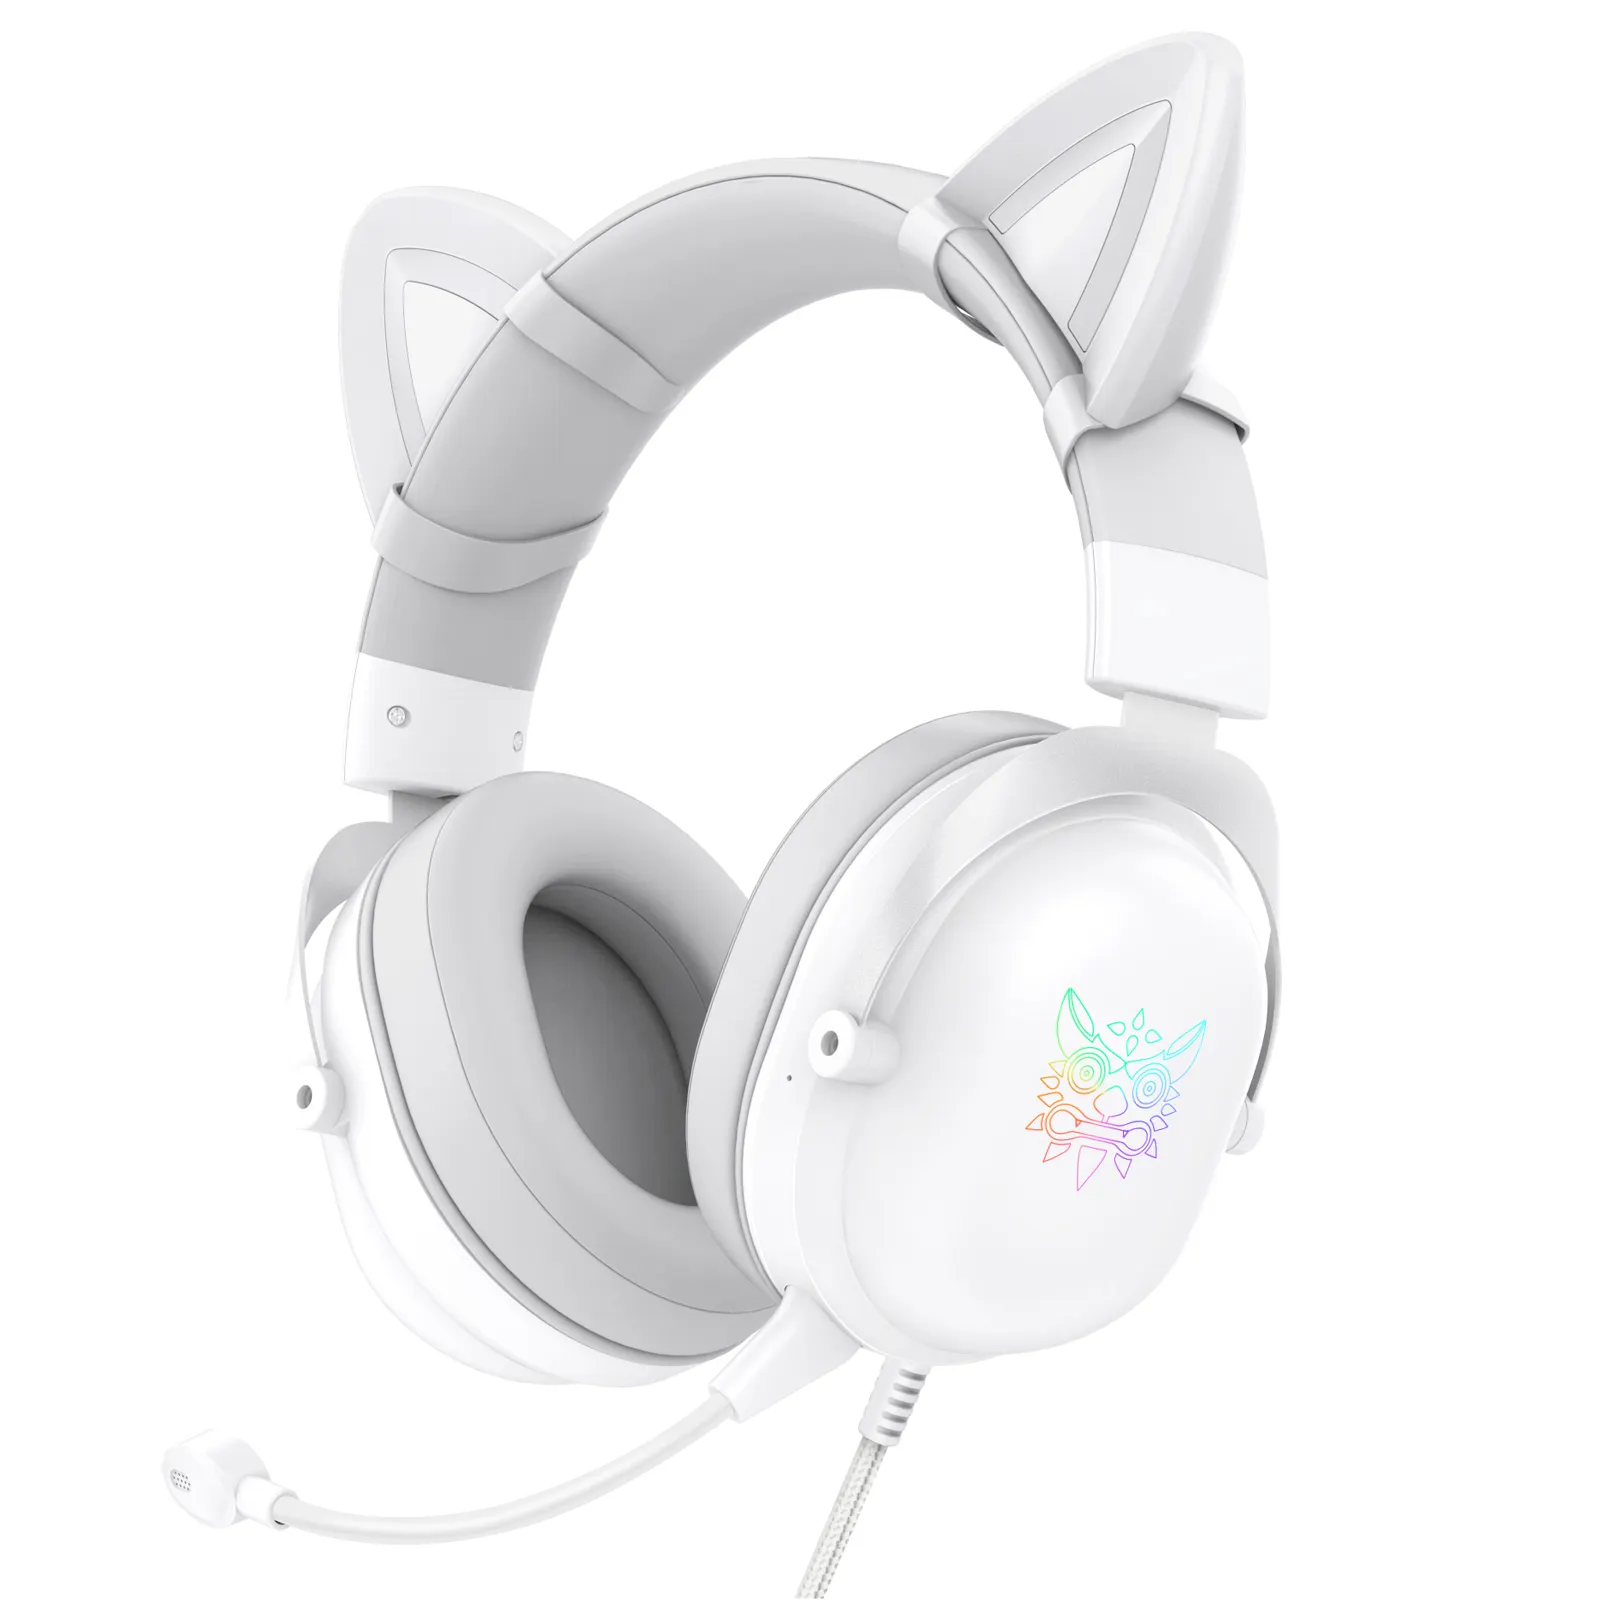 Onikuma X11 casque avec micro gaming fones de ouvido usb boult wired white cat hear phone 3.5mm wired earphone